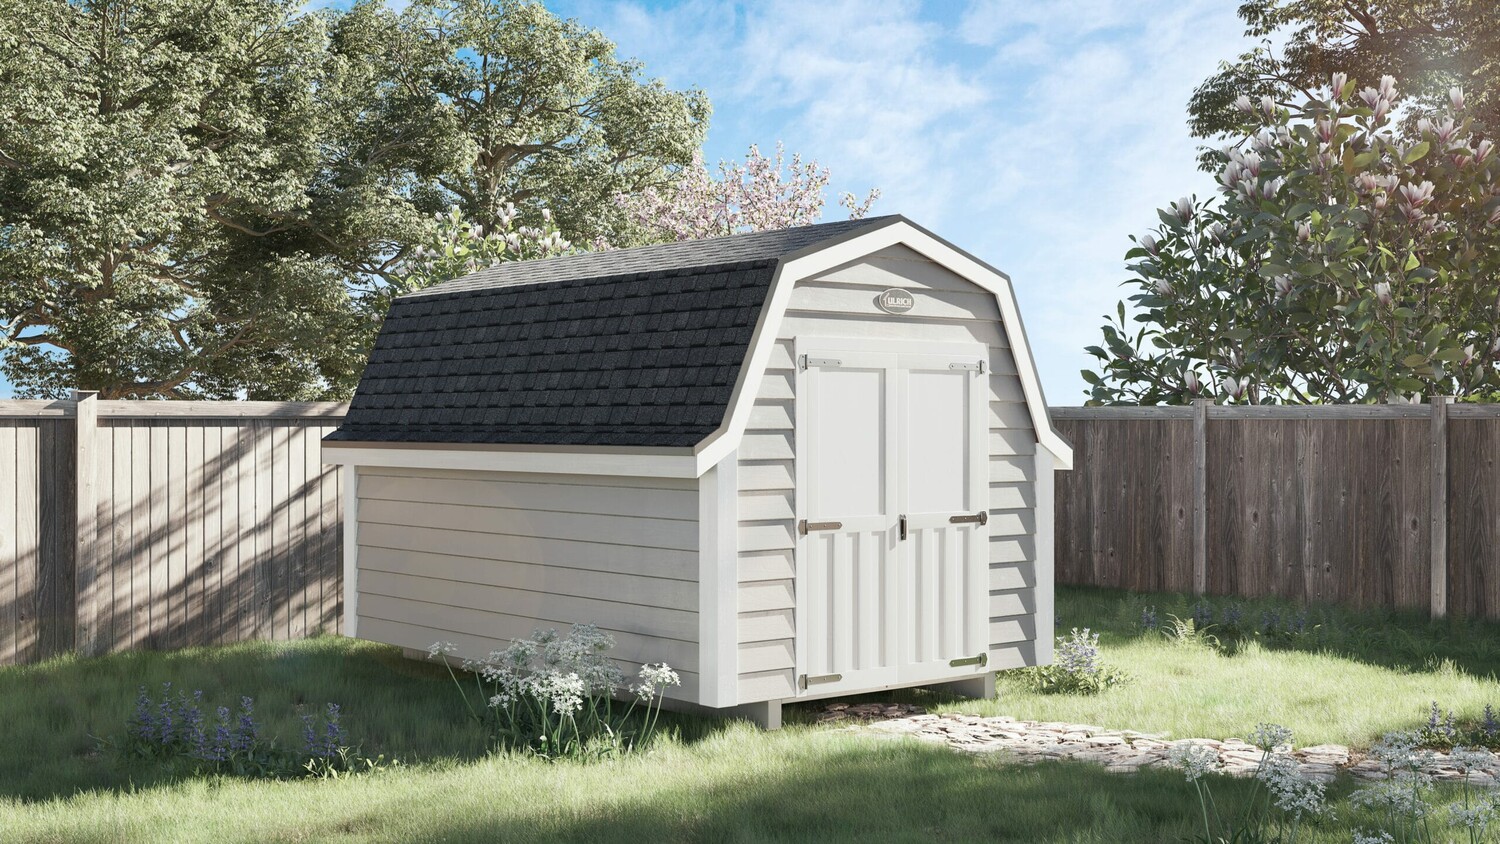 A byler barn shed in the backyard from Ulrich